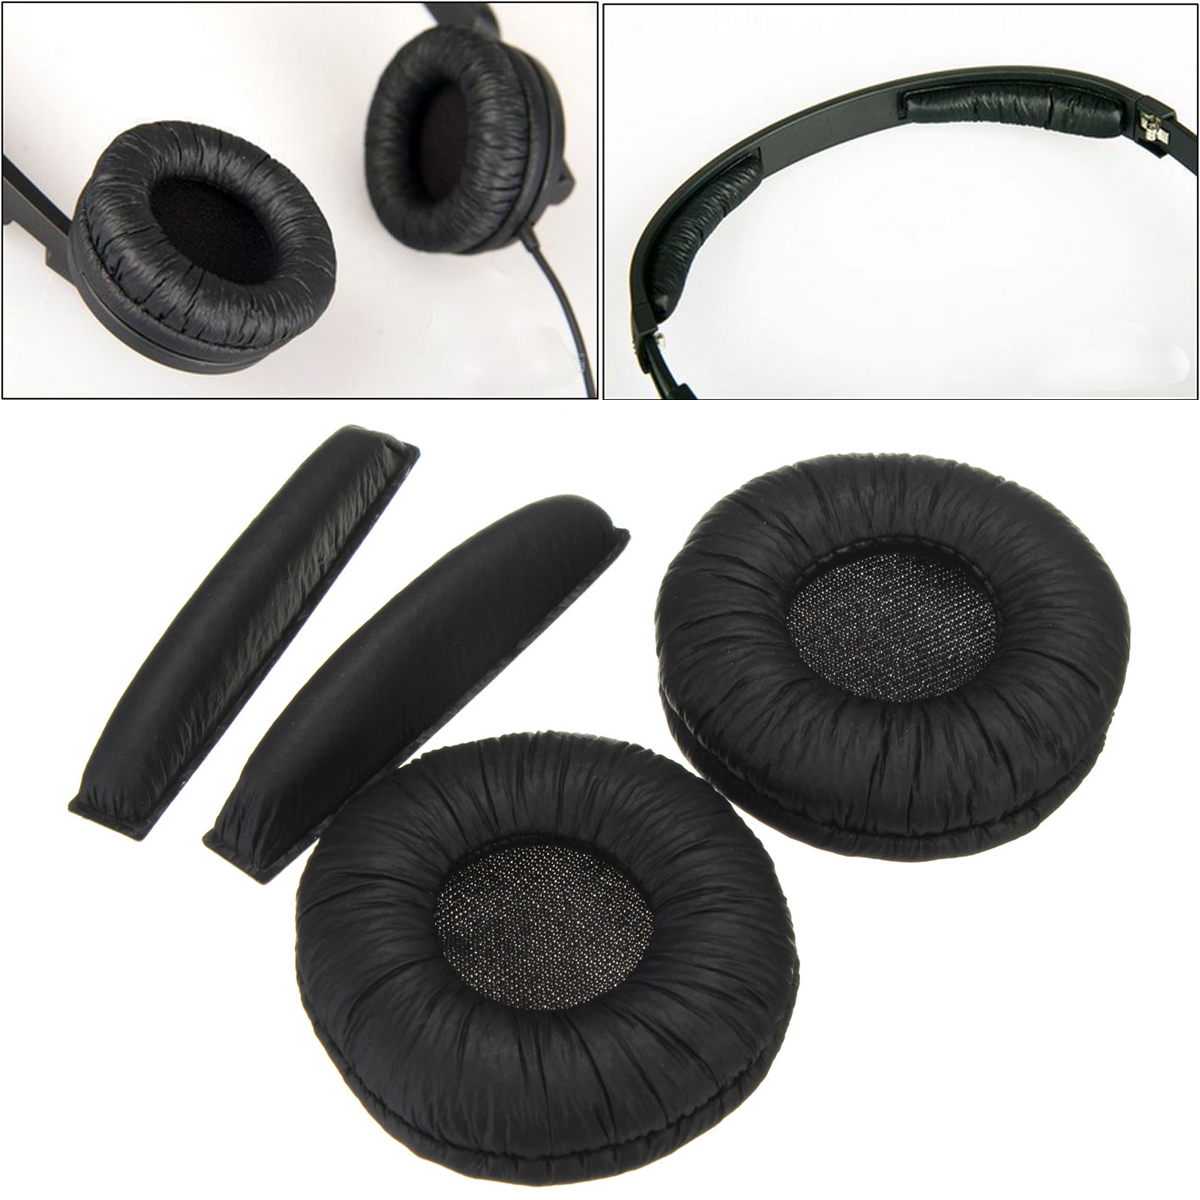 LEORY-1-Pair-For-Sennheiser-PX100-PX200-Headphone-Replacement-Ear-Pads-Cover-Headband-Cushion-1782024-5